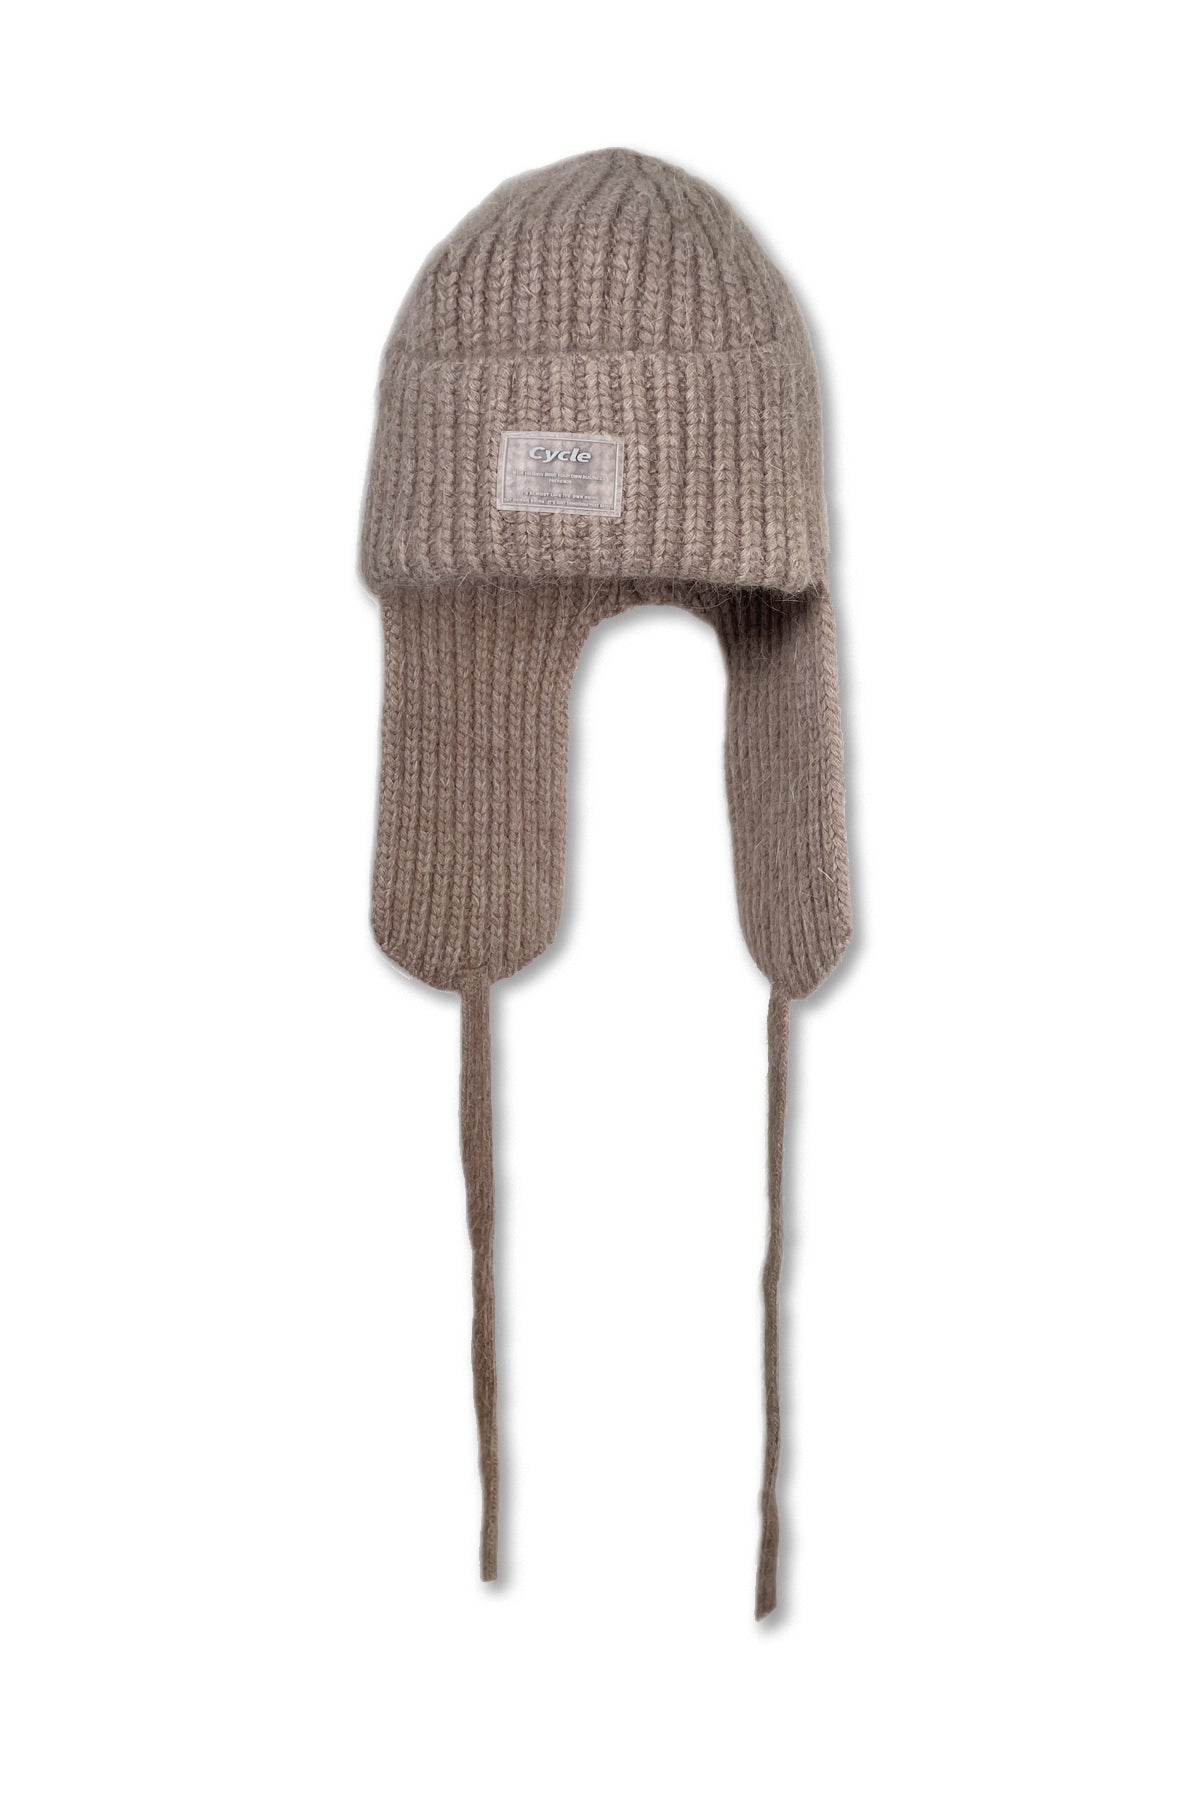 DRAW CODE MOHAIR KNIT CAP -WHITE-試着のみタグ付き